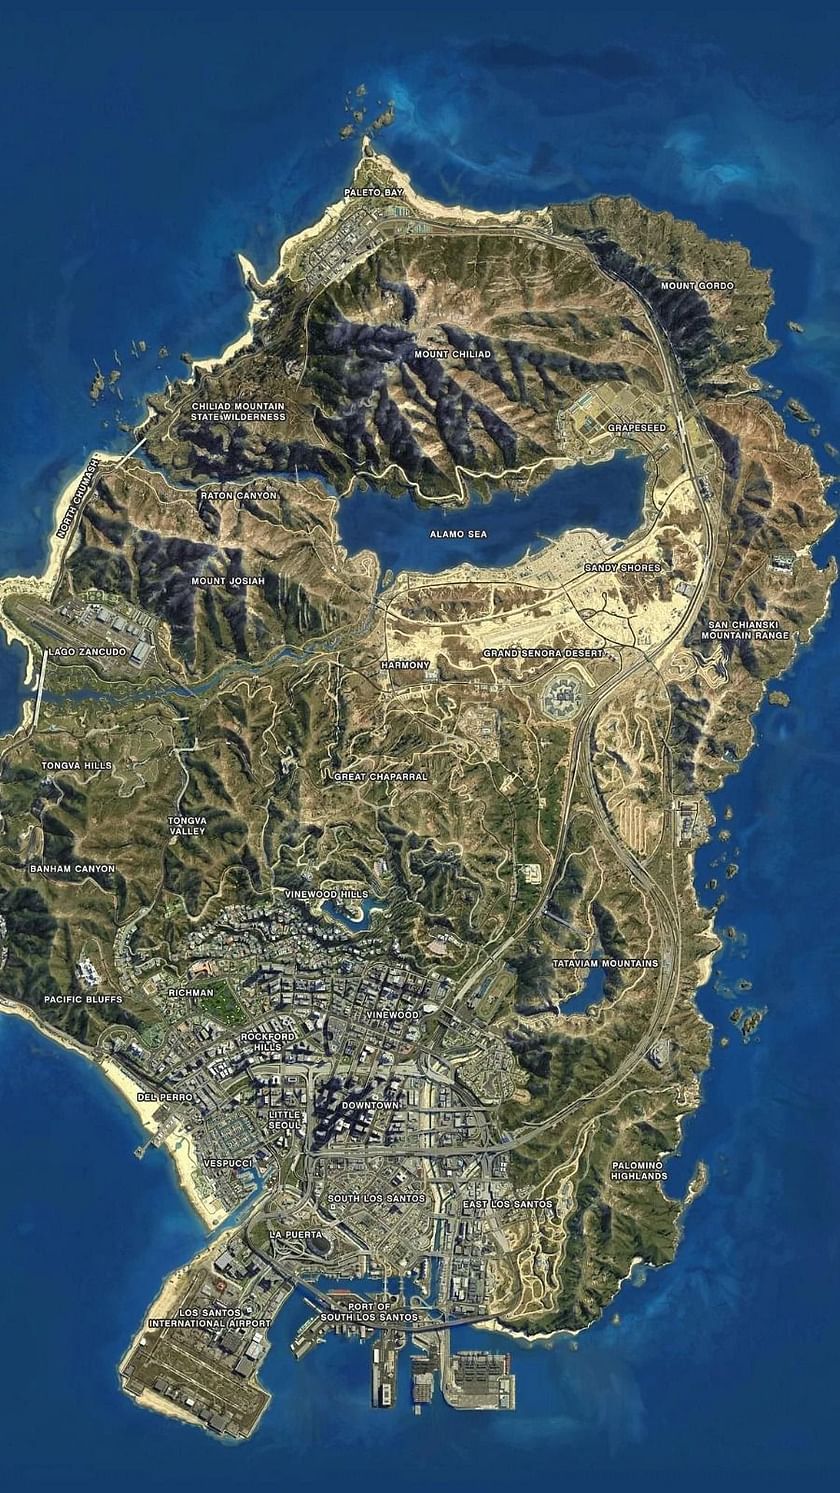 GTA 6 map: 'tiny portion' of game's open world surfaces online